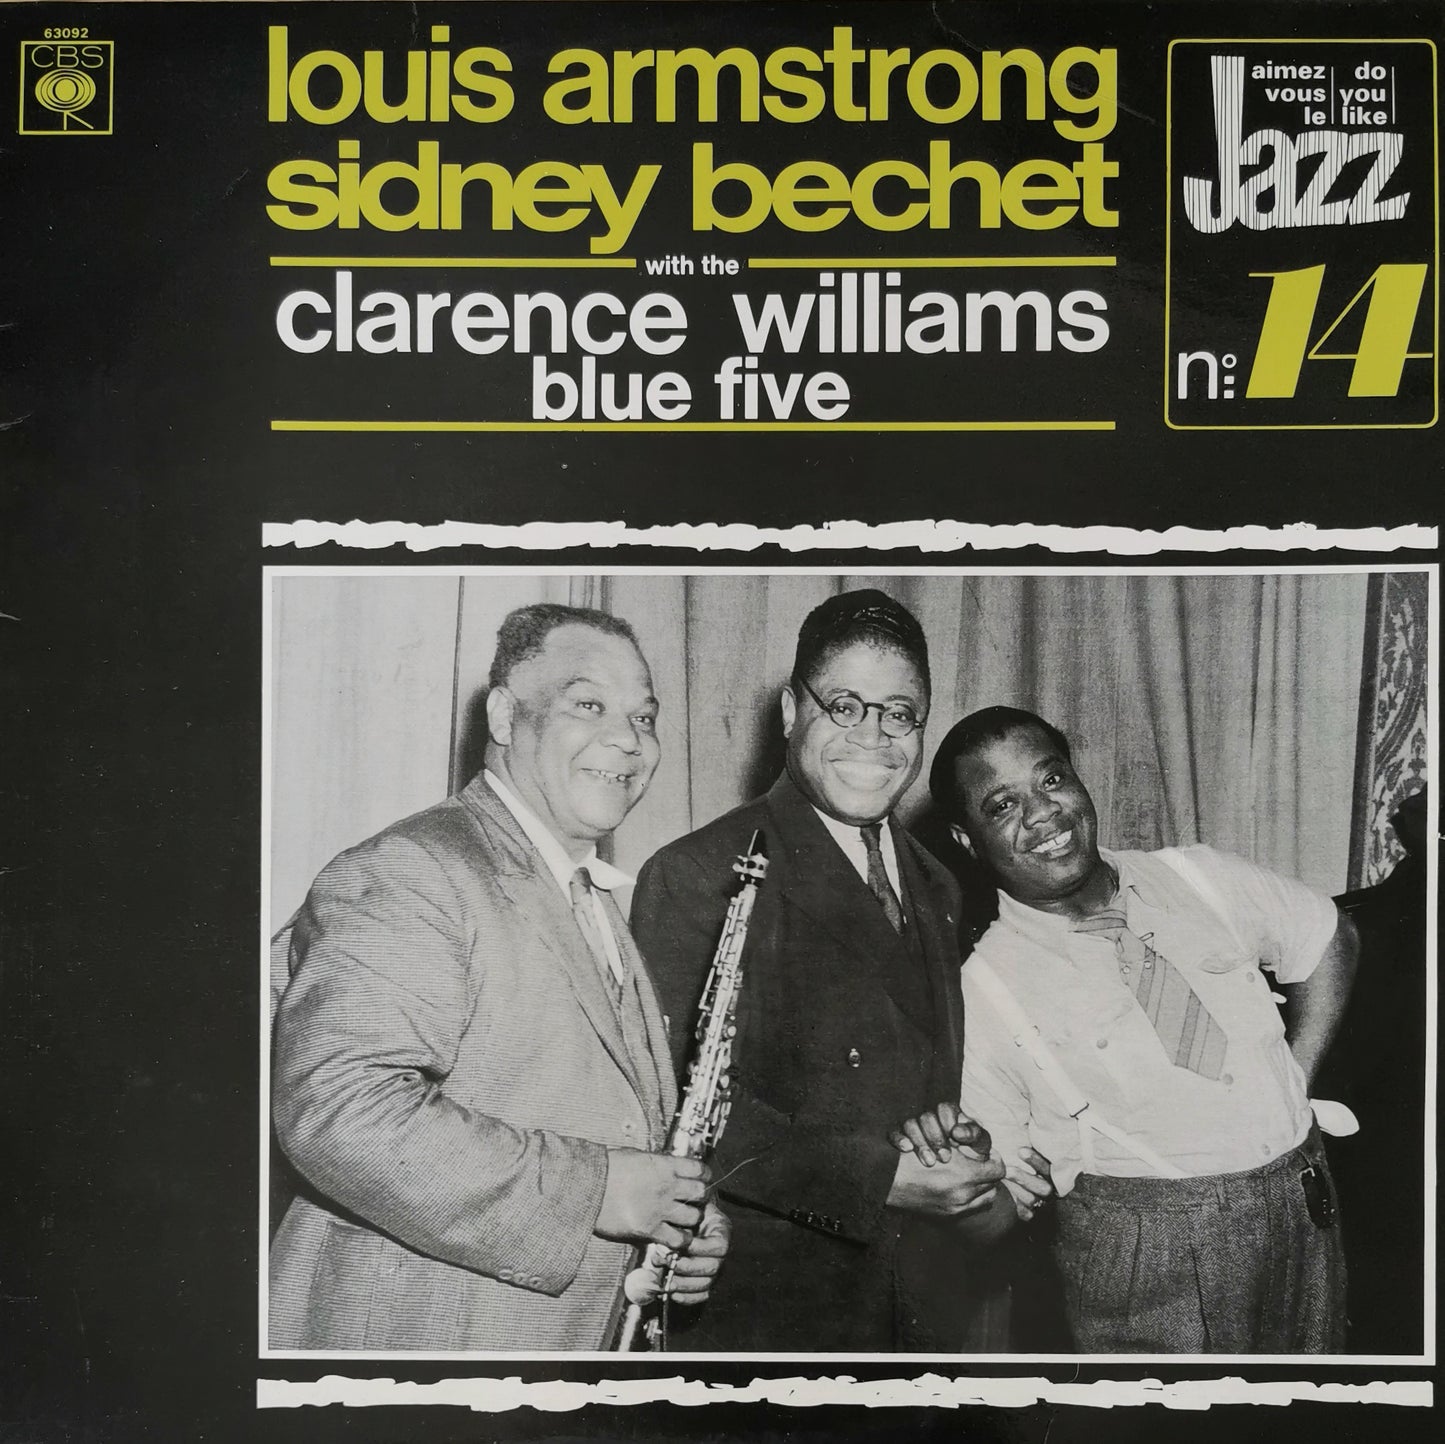 LOUIS AMSTRONG, SIDNEY BECHET - Louis Armstrong & Sidney Bechet With The Clarence Williams Blue Five